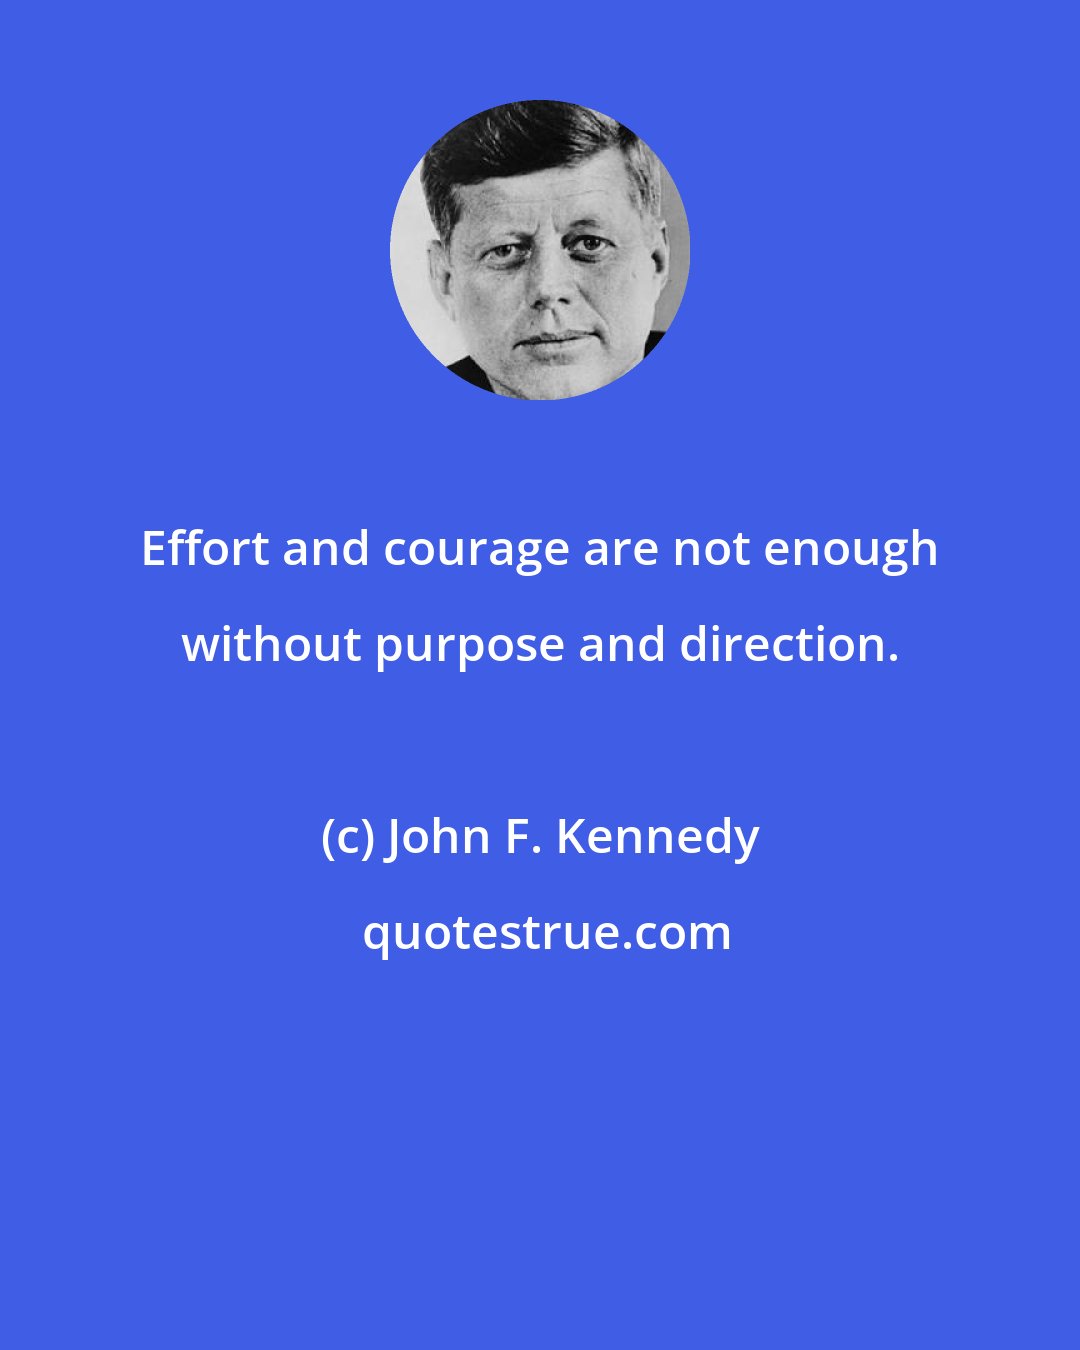 John F. Kennedy: Effort and courage are not enough without purpose and direction.